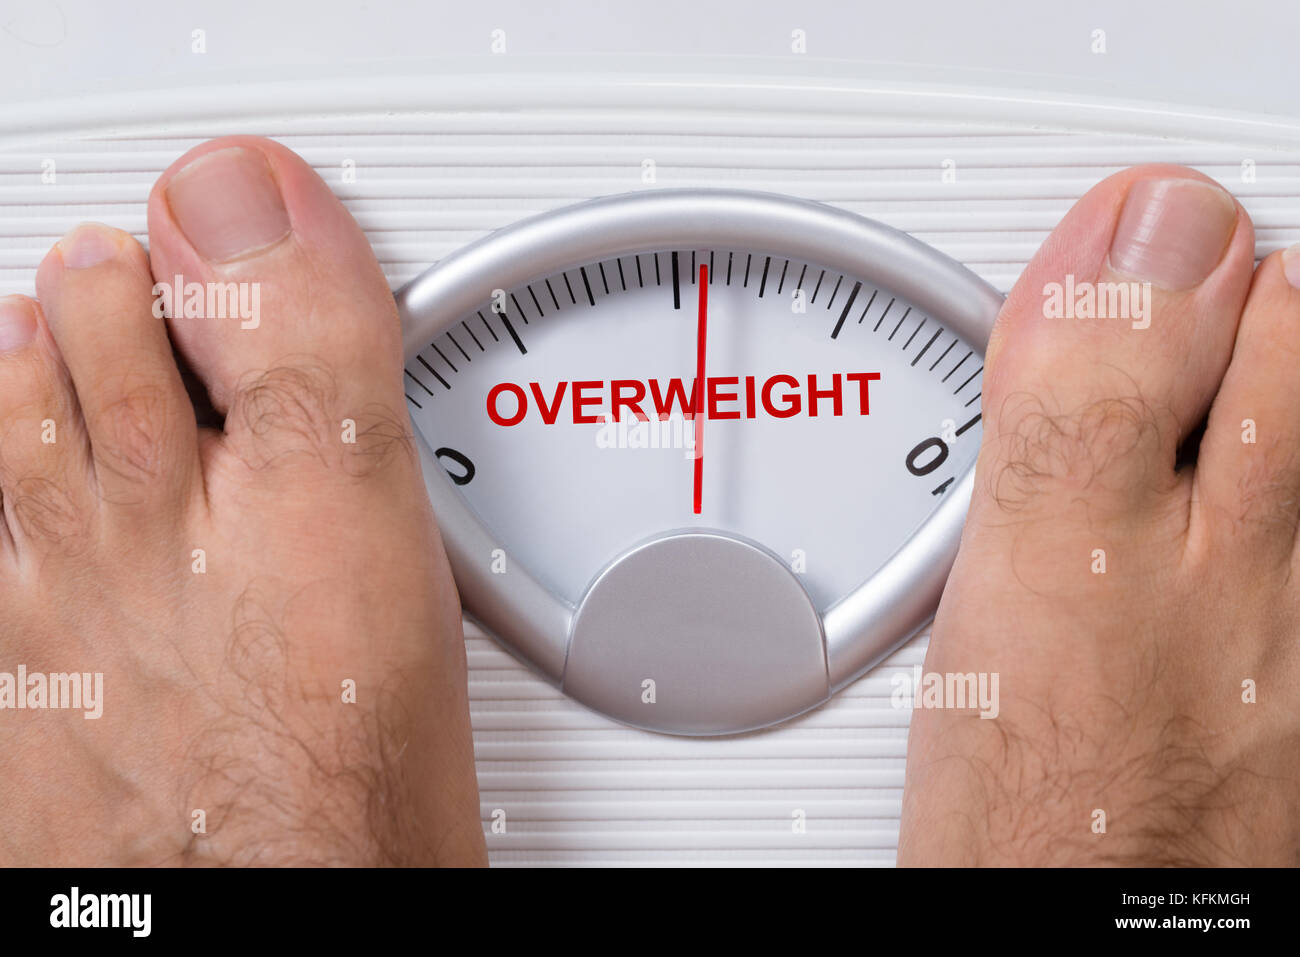 Closeup of man's feet on weight scale indicating Overweight Stock Photo